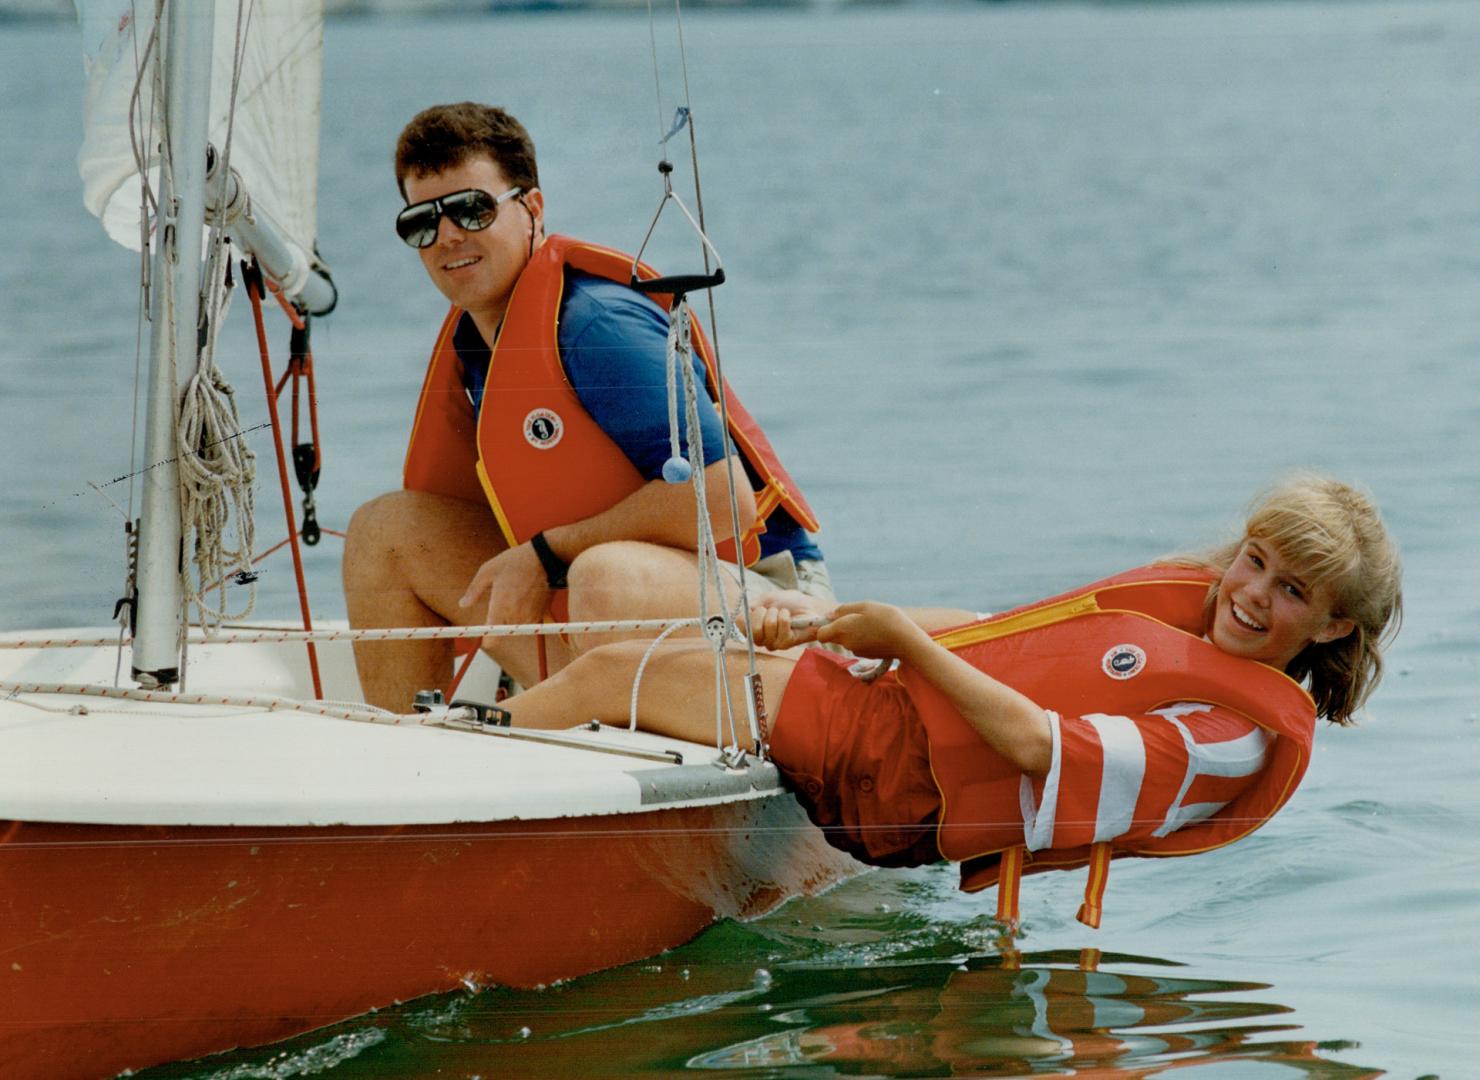 Scoot Hughes, instructor at Humber College School of Sailing, watches as Jennifer Marshall executes a hiking out manoeuvre in a Laser 11 dinghy. One t(...)